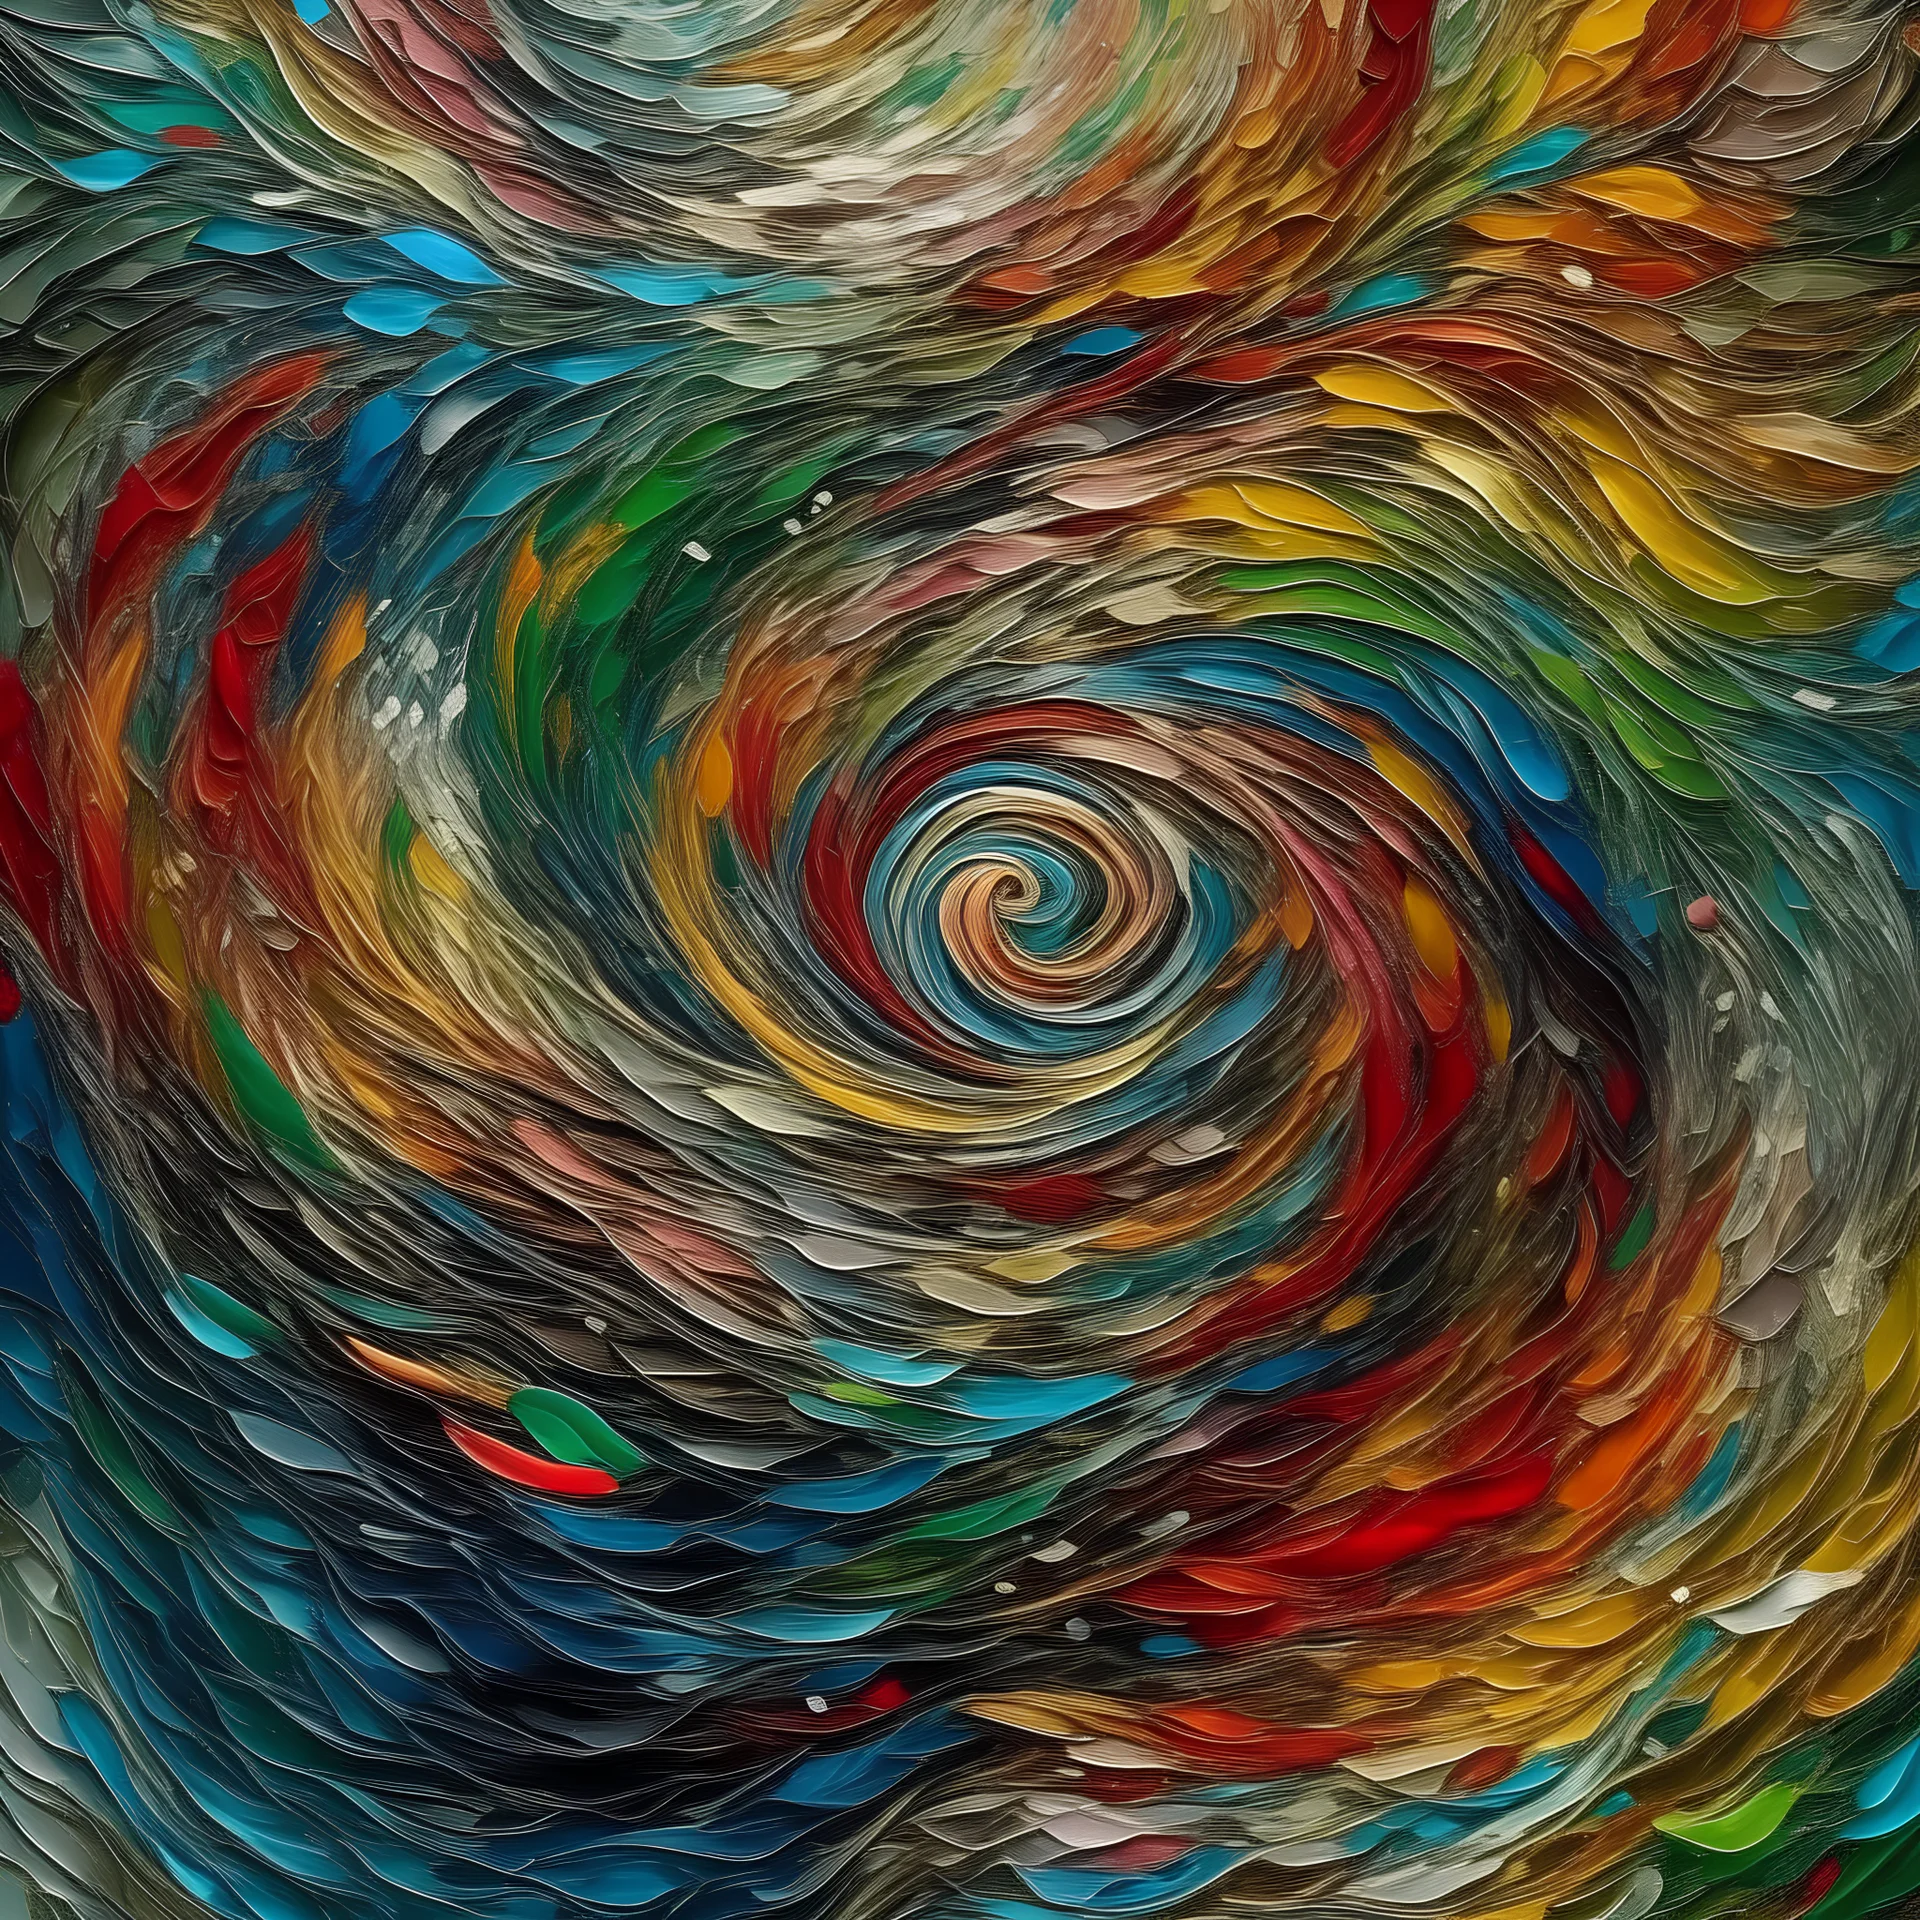 Chaos in Harmony: Picture a chaotic swirl of colors and textures that gradually coalesce into a harmonious composition. Within this chaos, subtle patterns emerge, drawing the viewer's gaze and encouraging contemplation of the delicate balance between order and disorder.